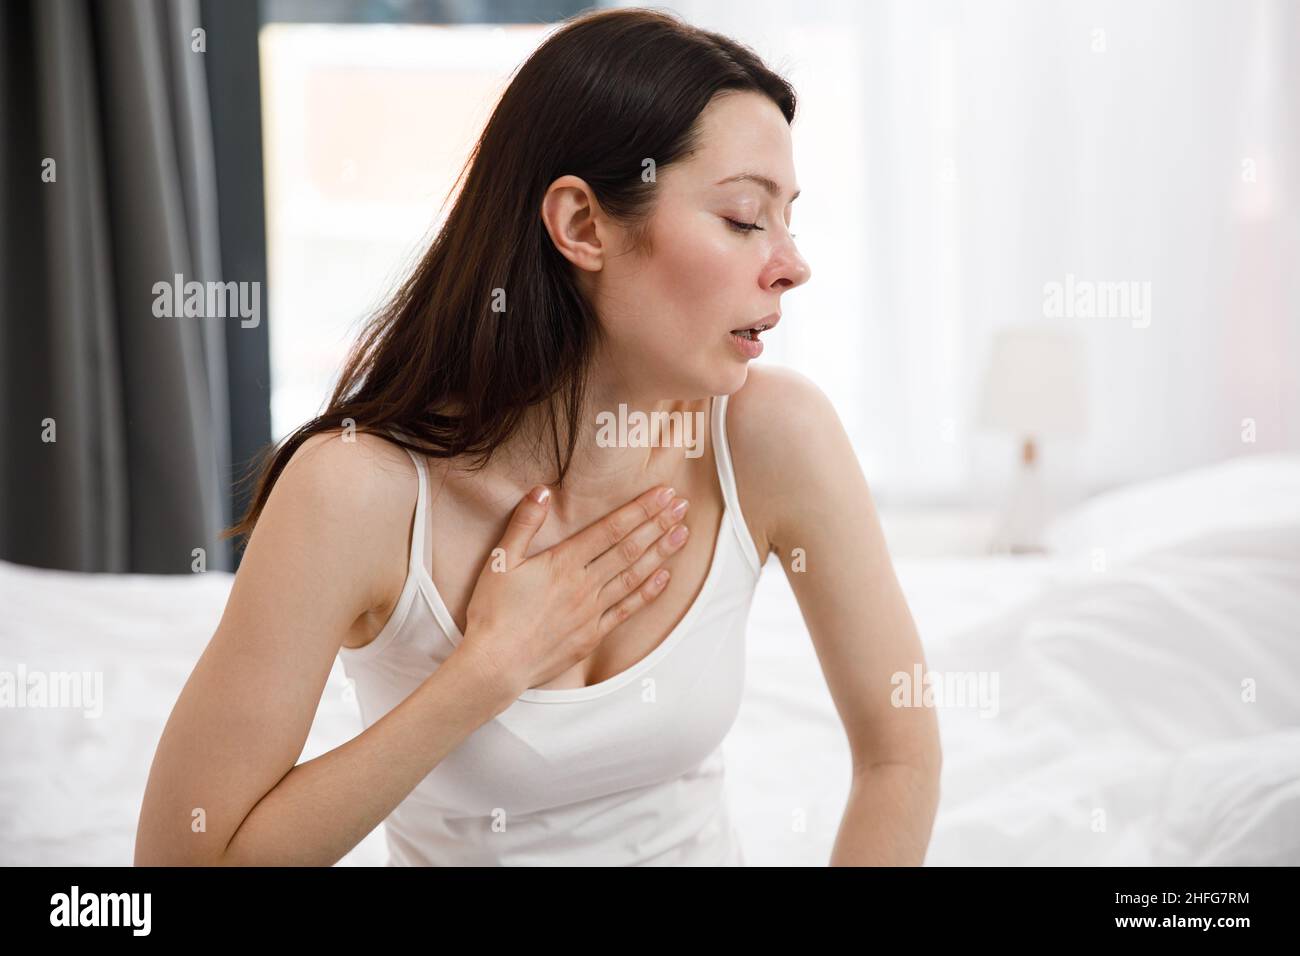 Portrait of an unhealthy young woman coughing a lot, suffering from cough, has chest pain. The sick desperate female has flu. Cold, sickness Stock Photo